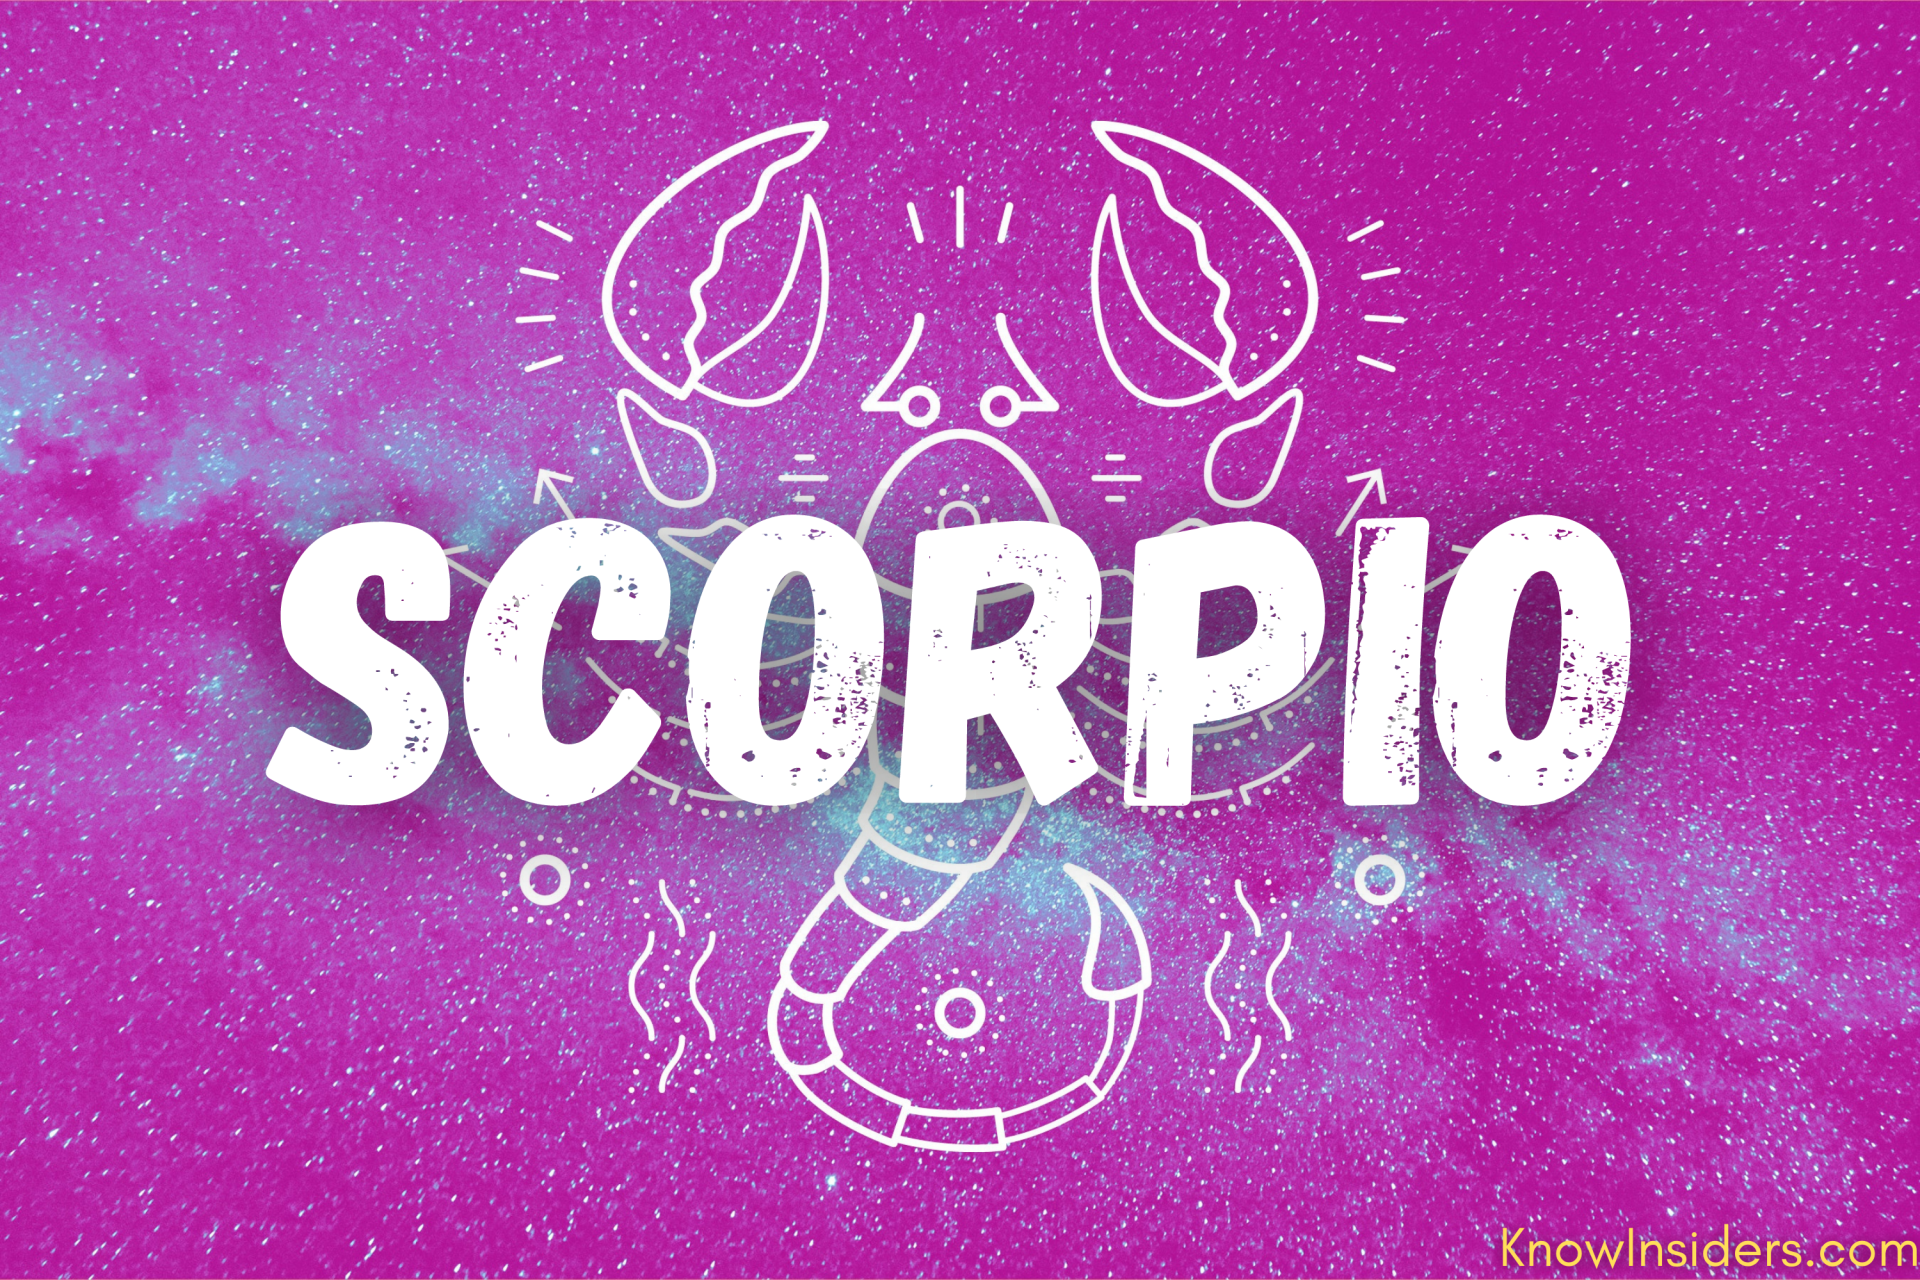 SCORPIO Horoscope August 2021 - Monthly Predictions for Love, Health, Career and Money